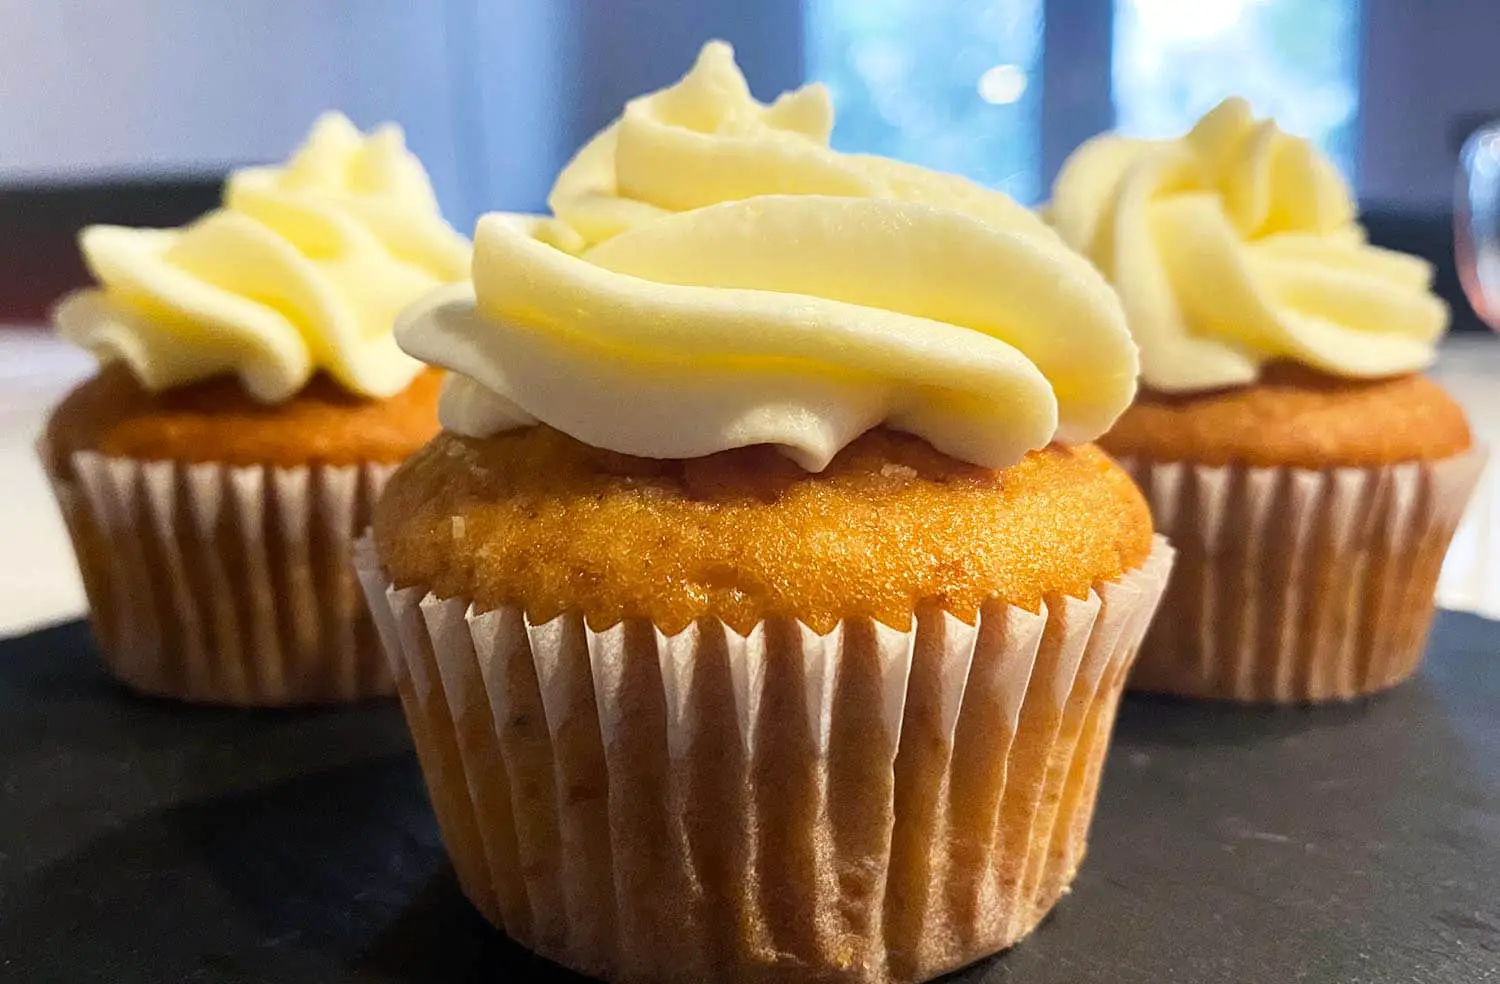 VANILLA CUPCAKES WITH CREAM CHEESE FROSTING RECIPE